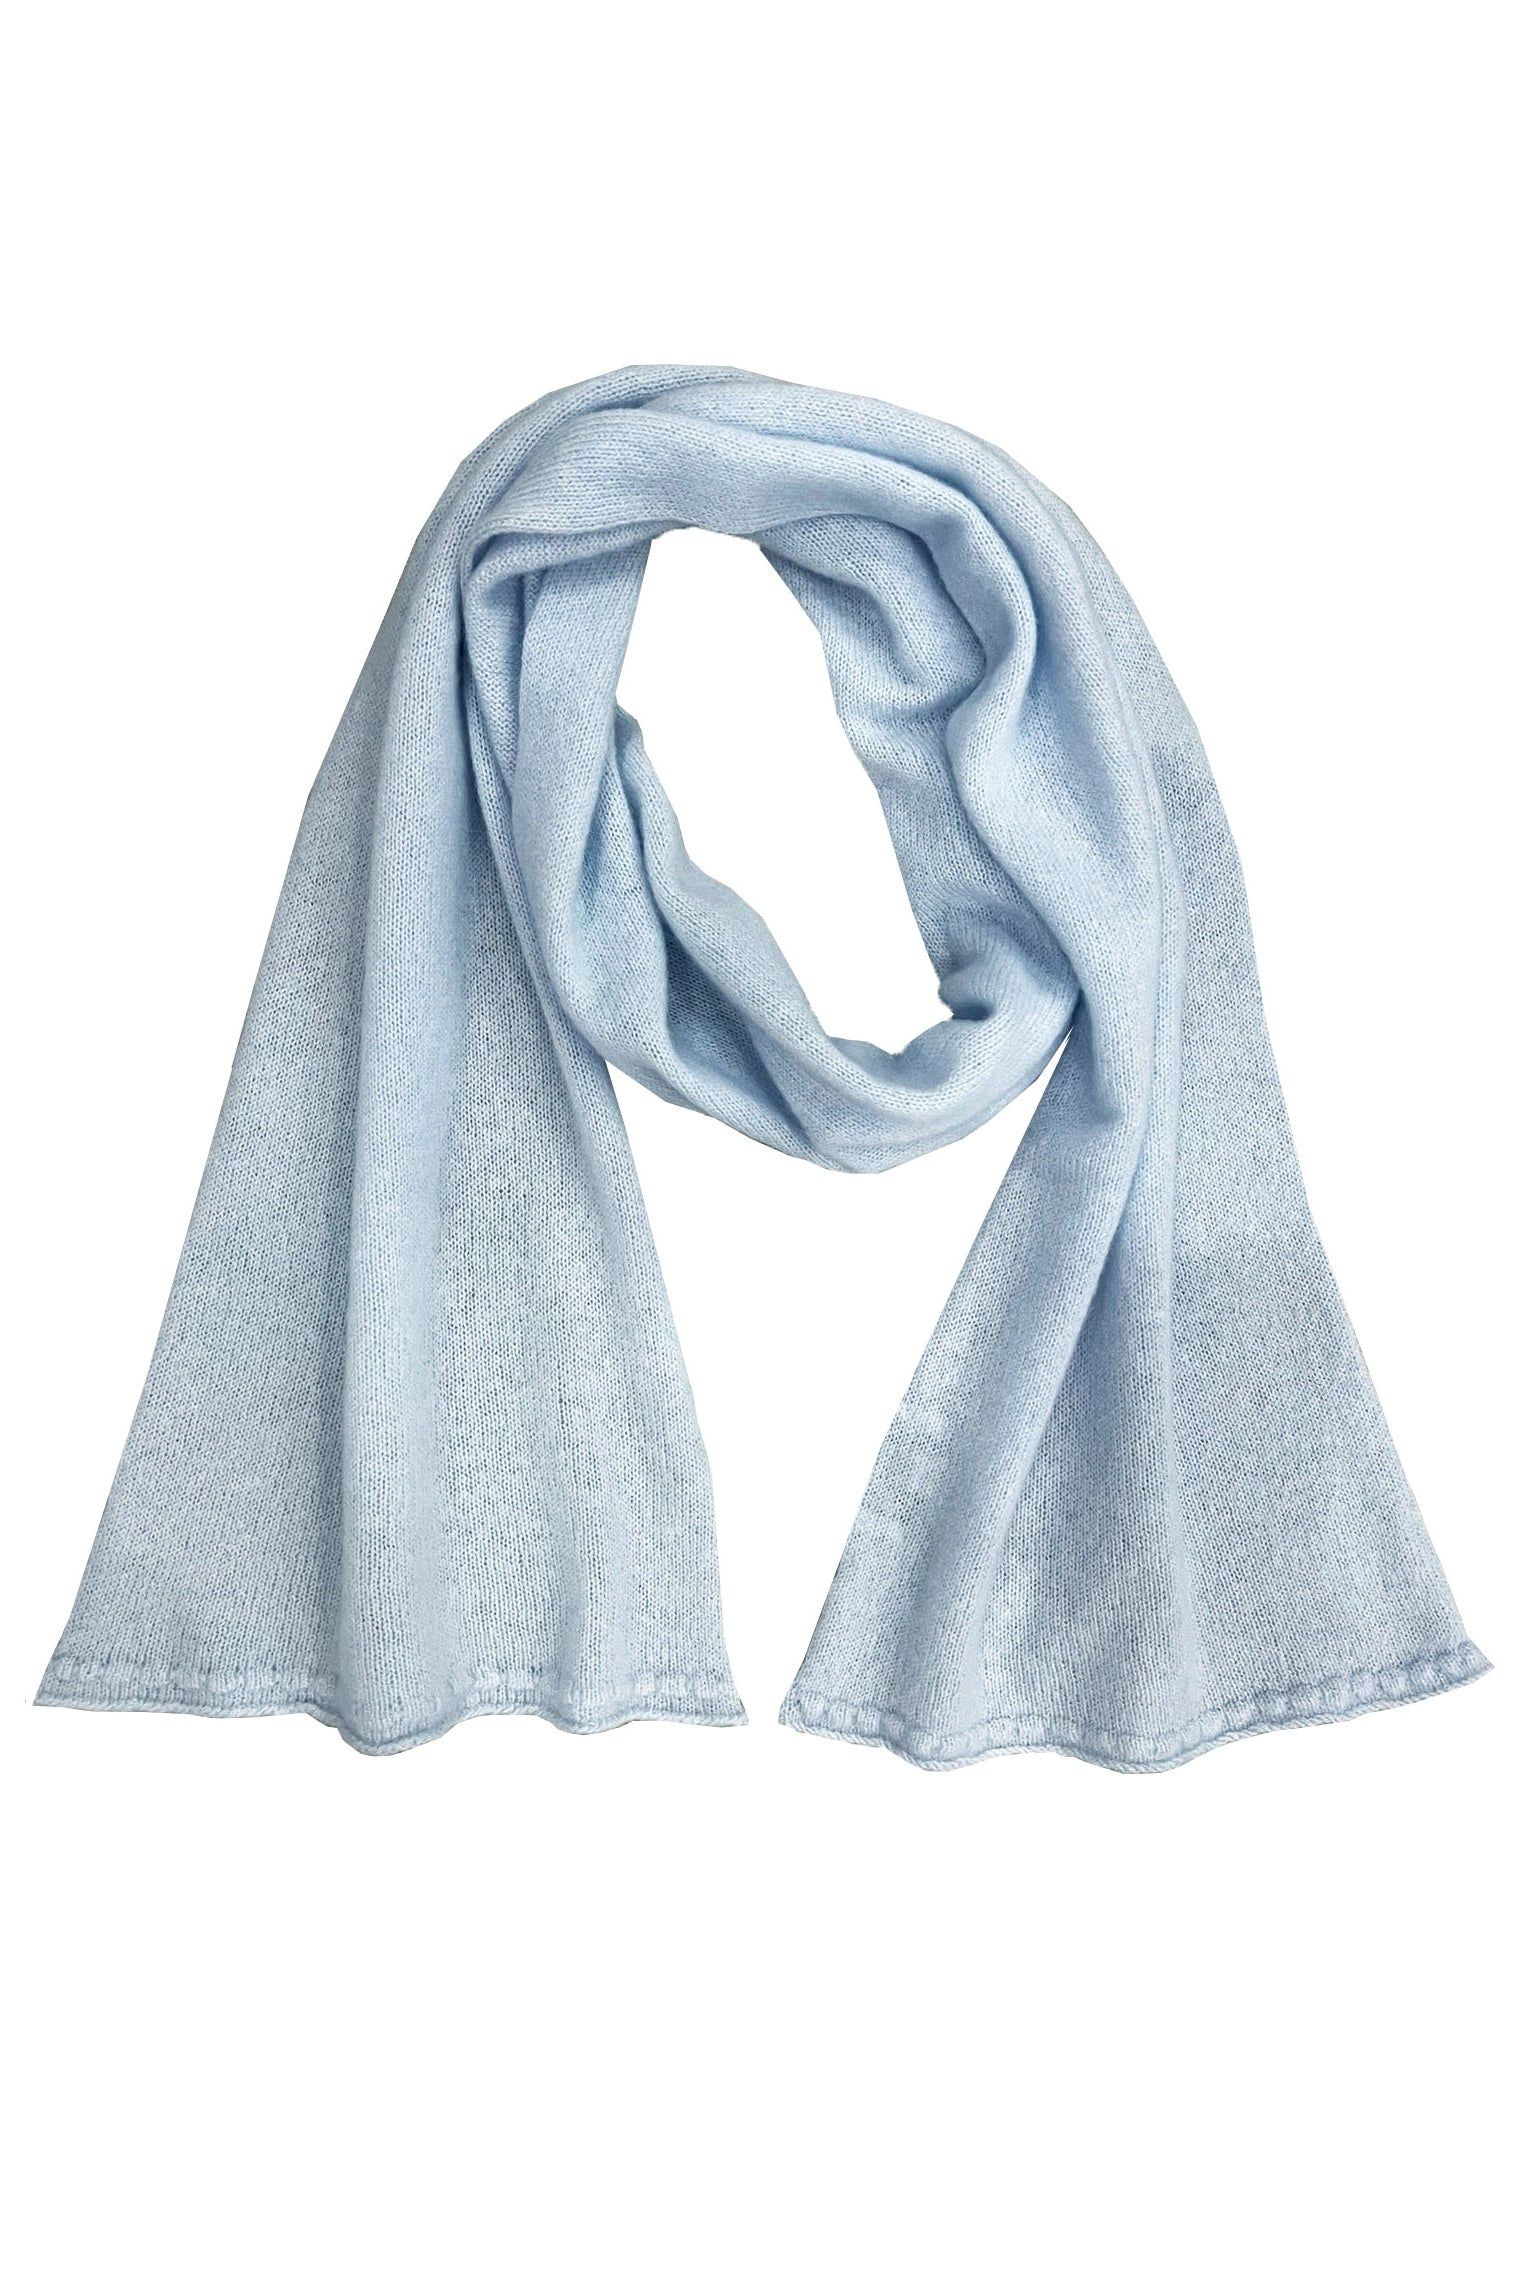 Add a new style to your fashion
collection with Cashmere scarf